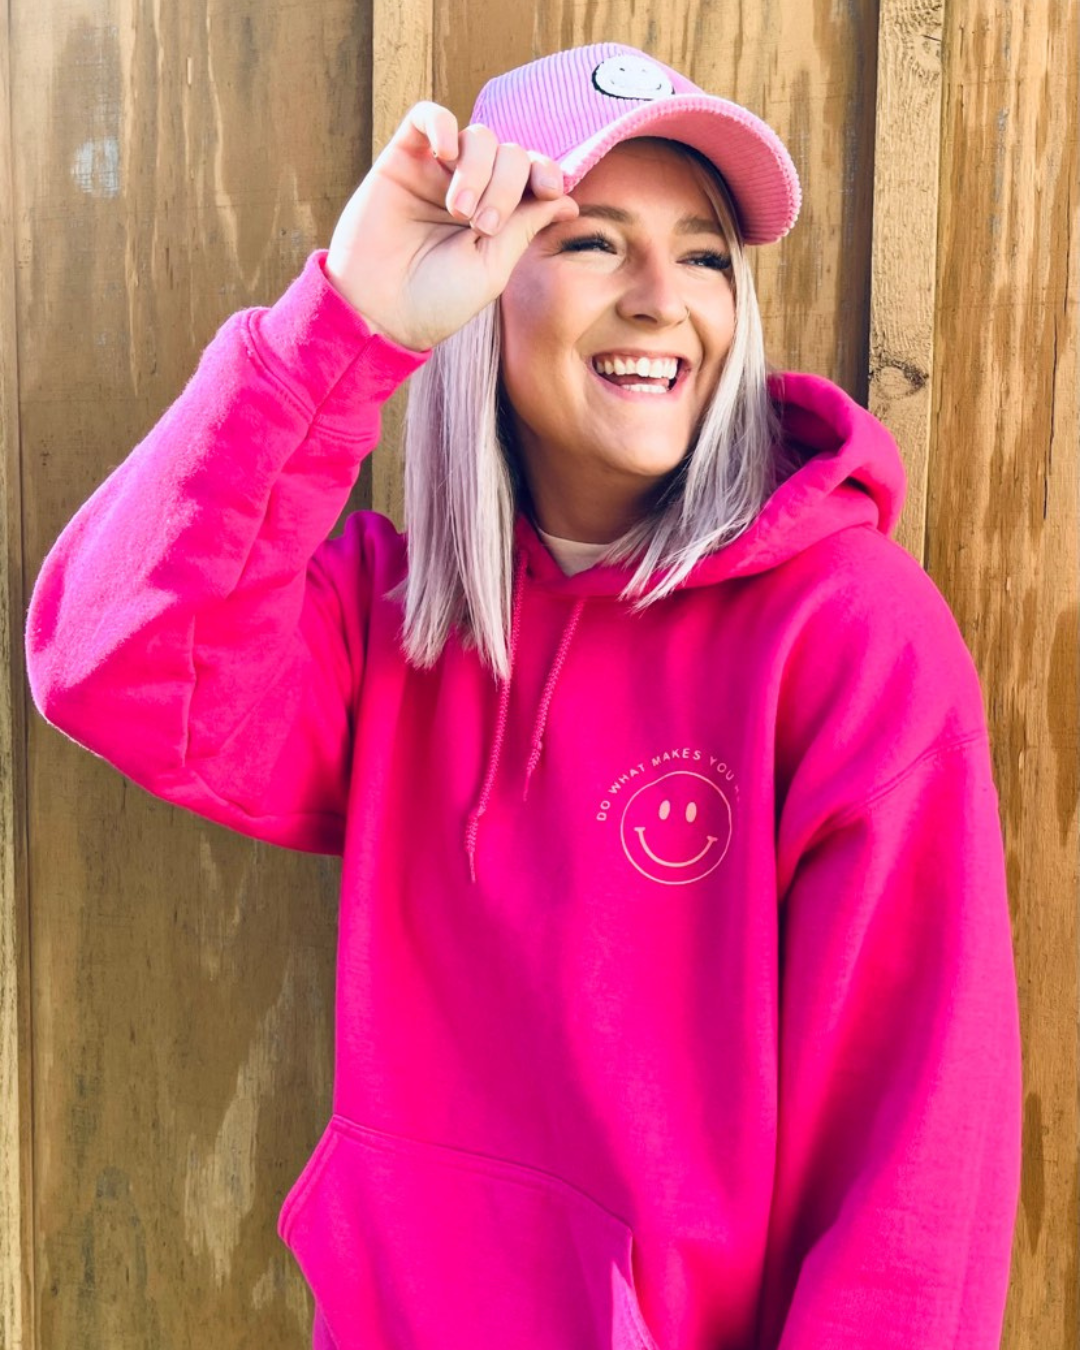 This Do What Makes You Happy Hoodie is the perfect way to brighten up your wardrobe. Crafted with a bright pink hoodie and cheerful orange design, it is sure to make you smile. The soft and comfortable fabric pairs well with biker shorts or your favorite jeans.